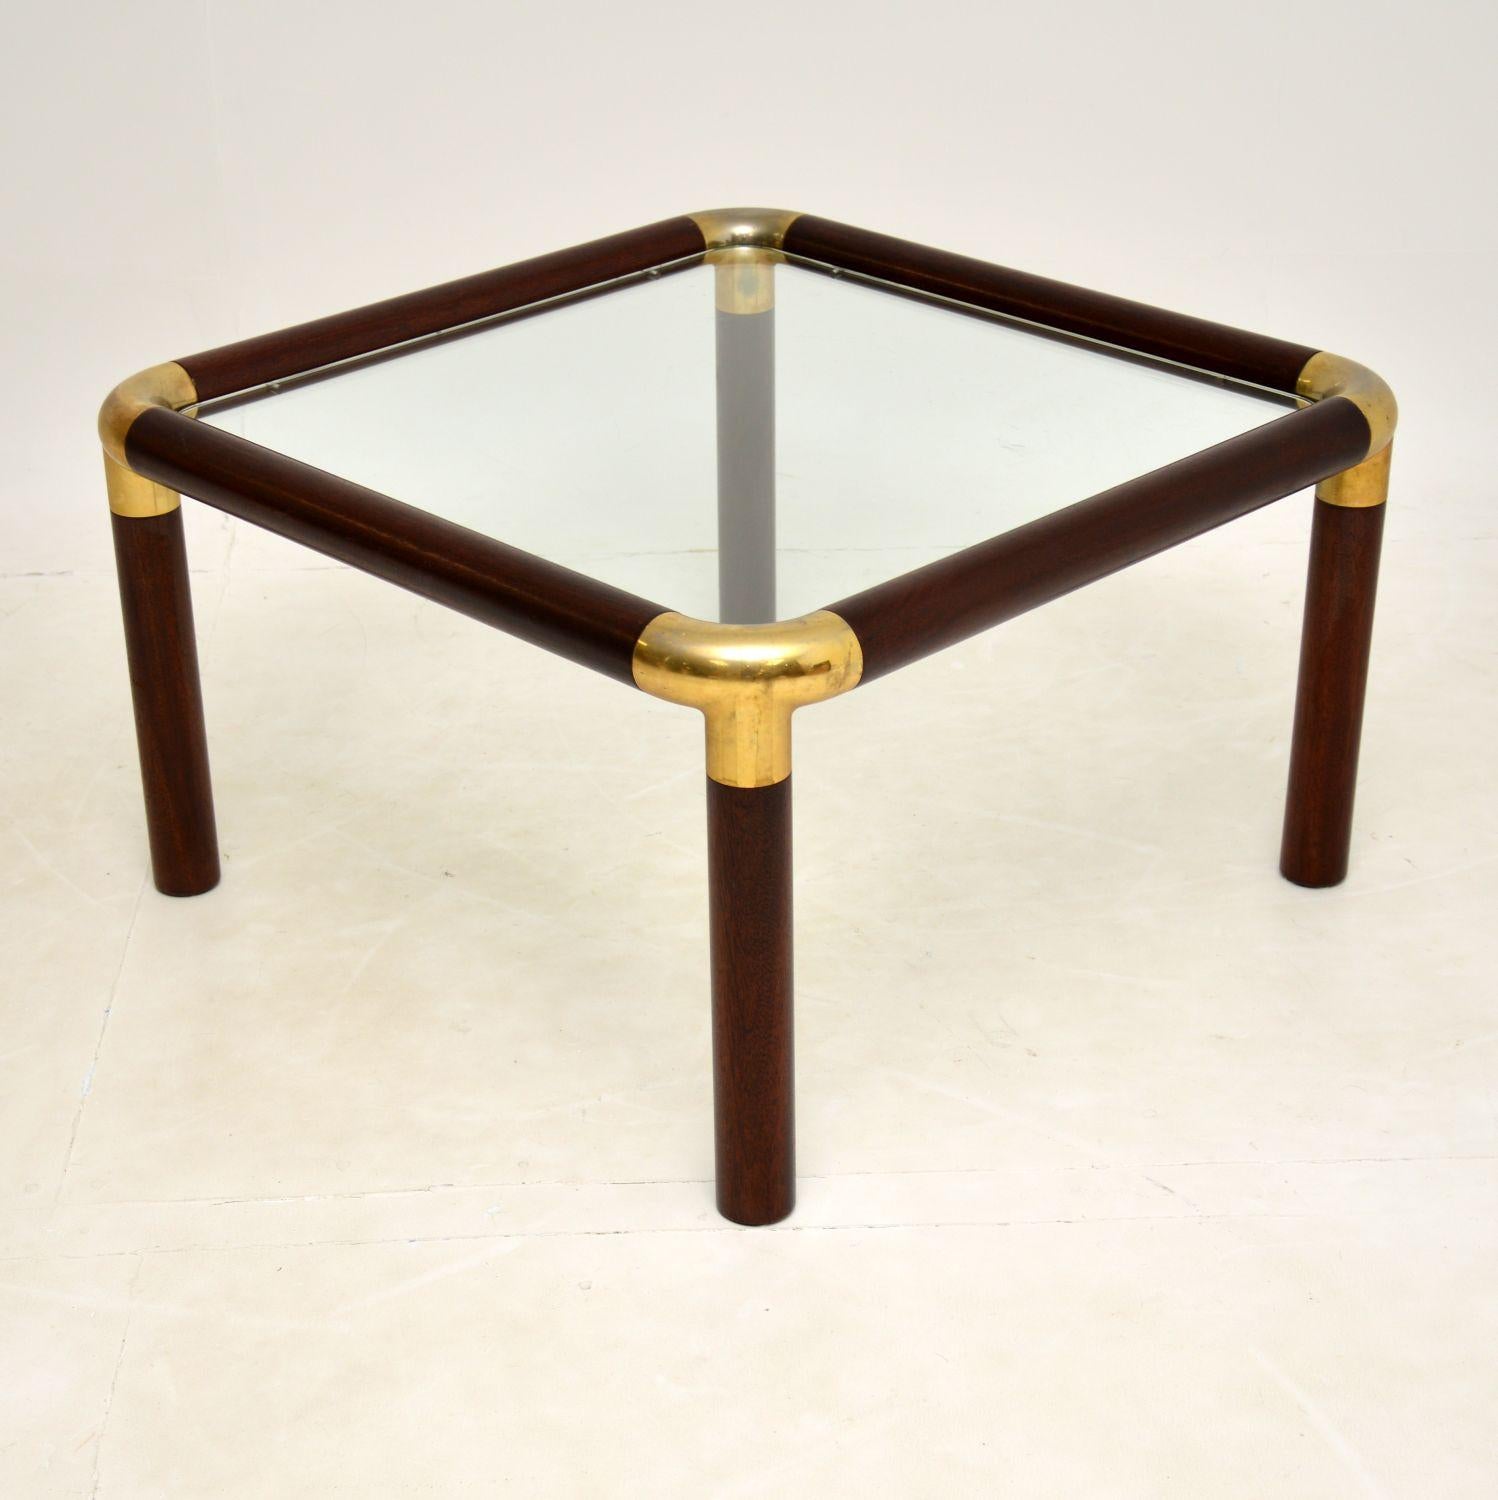 A superb vintage coffee table, beautifully made from solid wood and brass. This was made in England, it dates from around the 1970’s.

The quality is amazing, this has a thick and very well made tubular frame, and a thick inset glass top that is